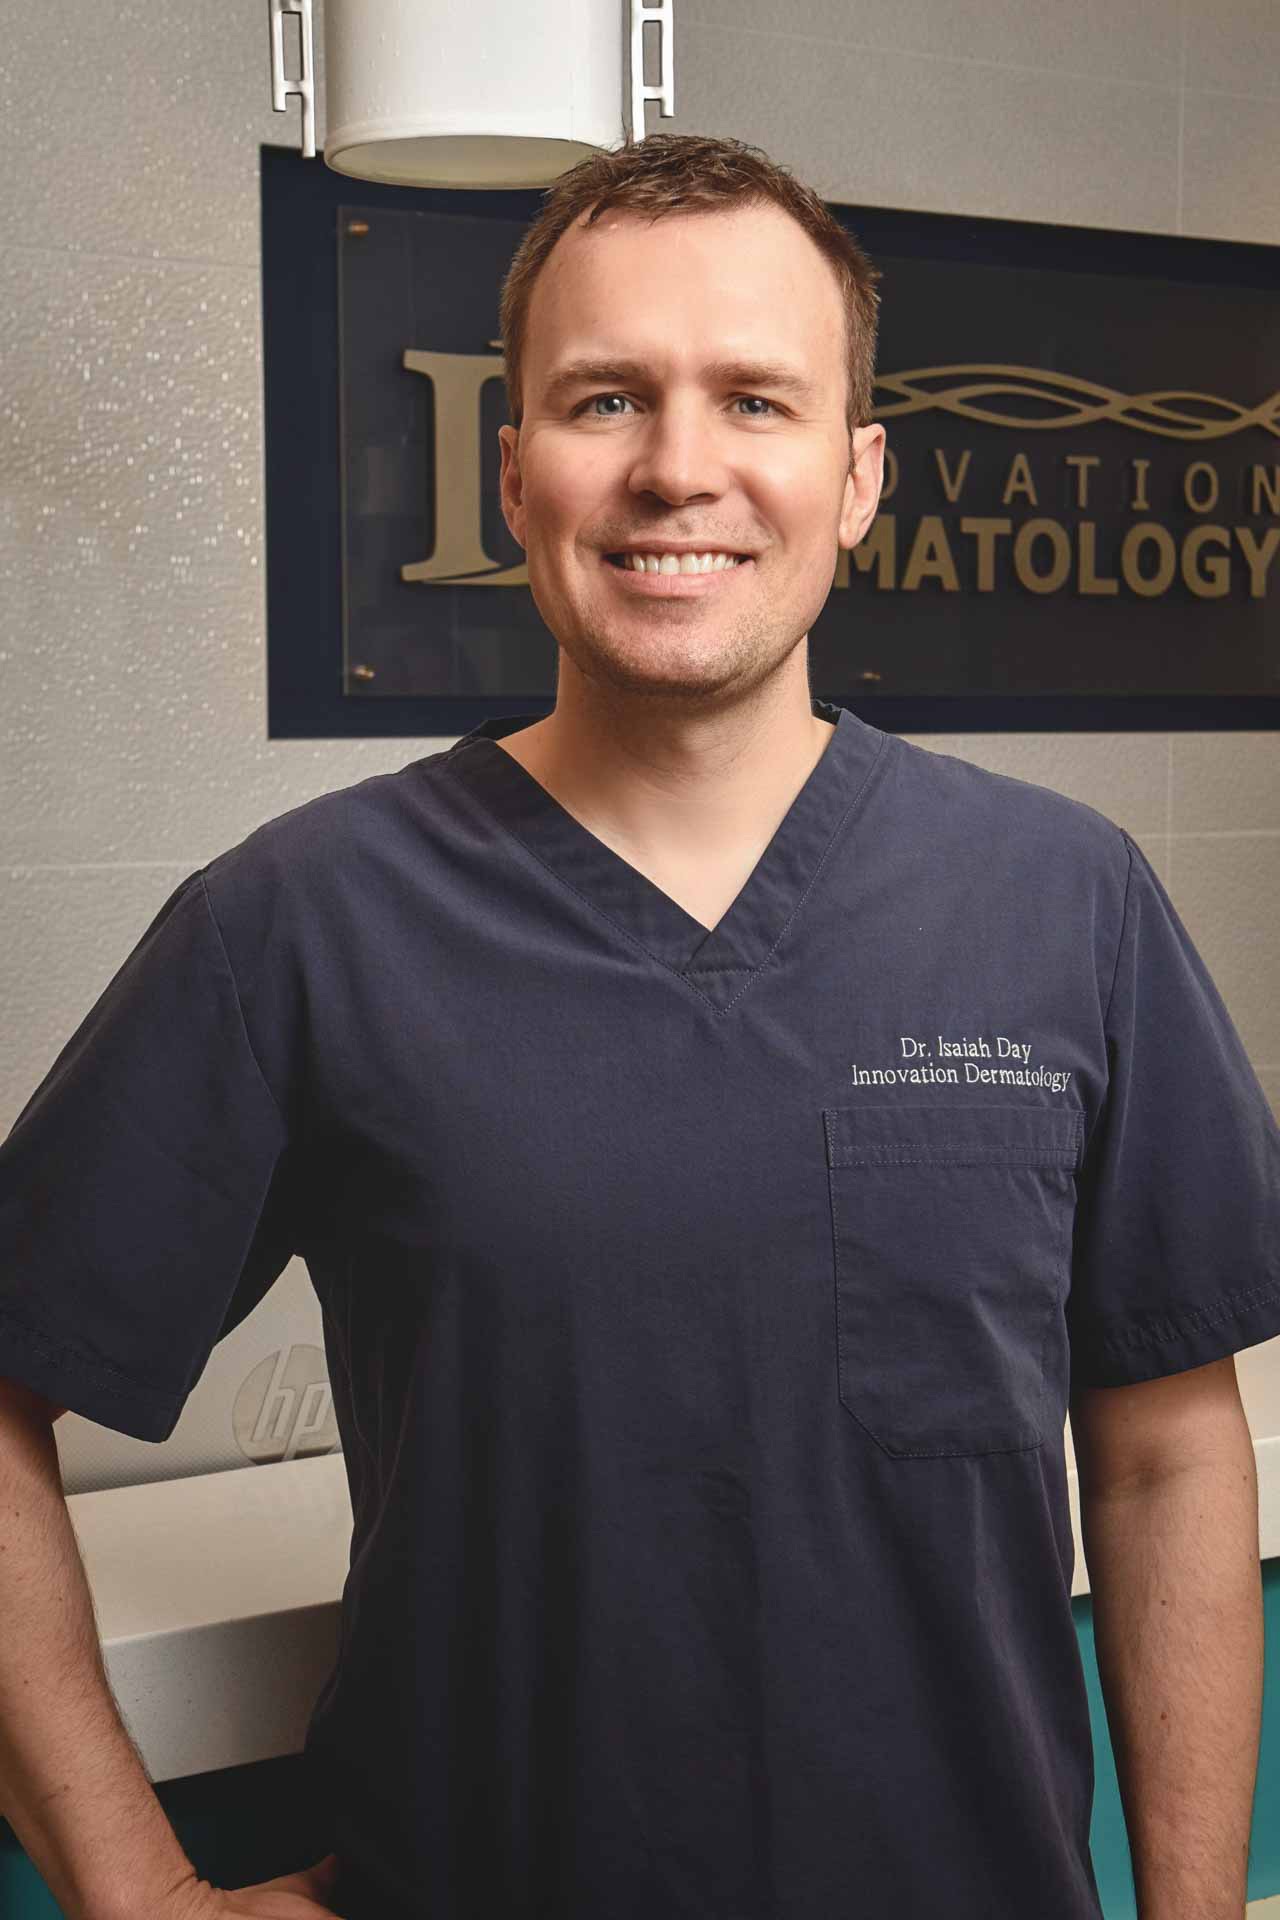 Dr. Isaiah Day | Innovation Dermatology | Red Deer Dermatology & Med Spa Clinic